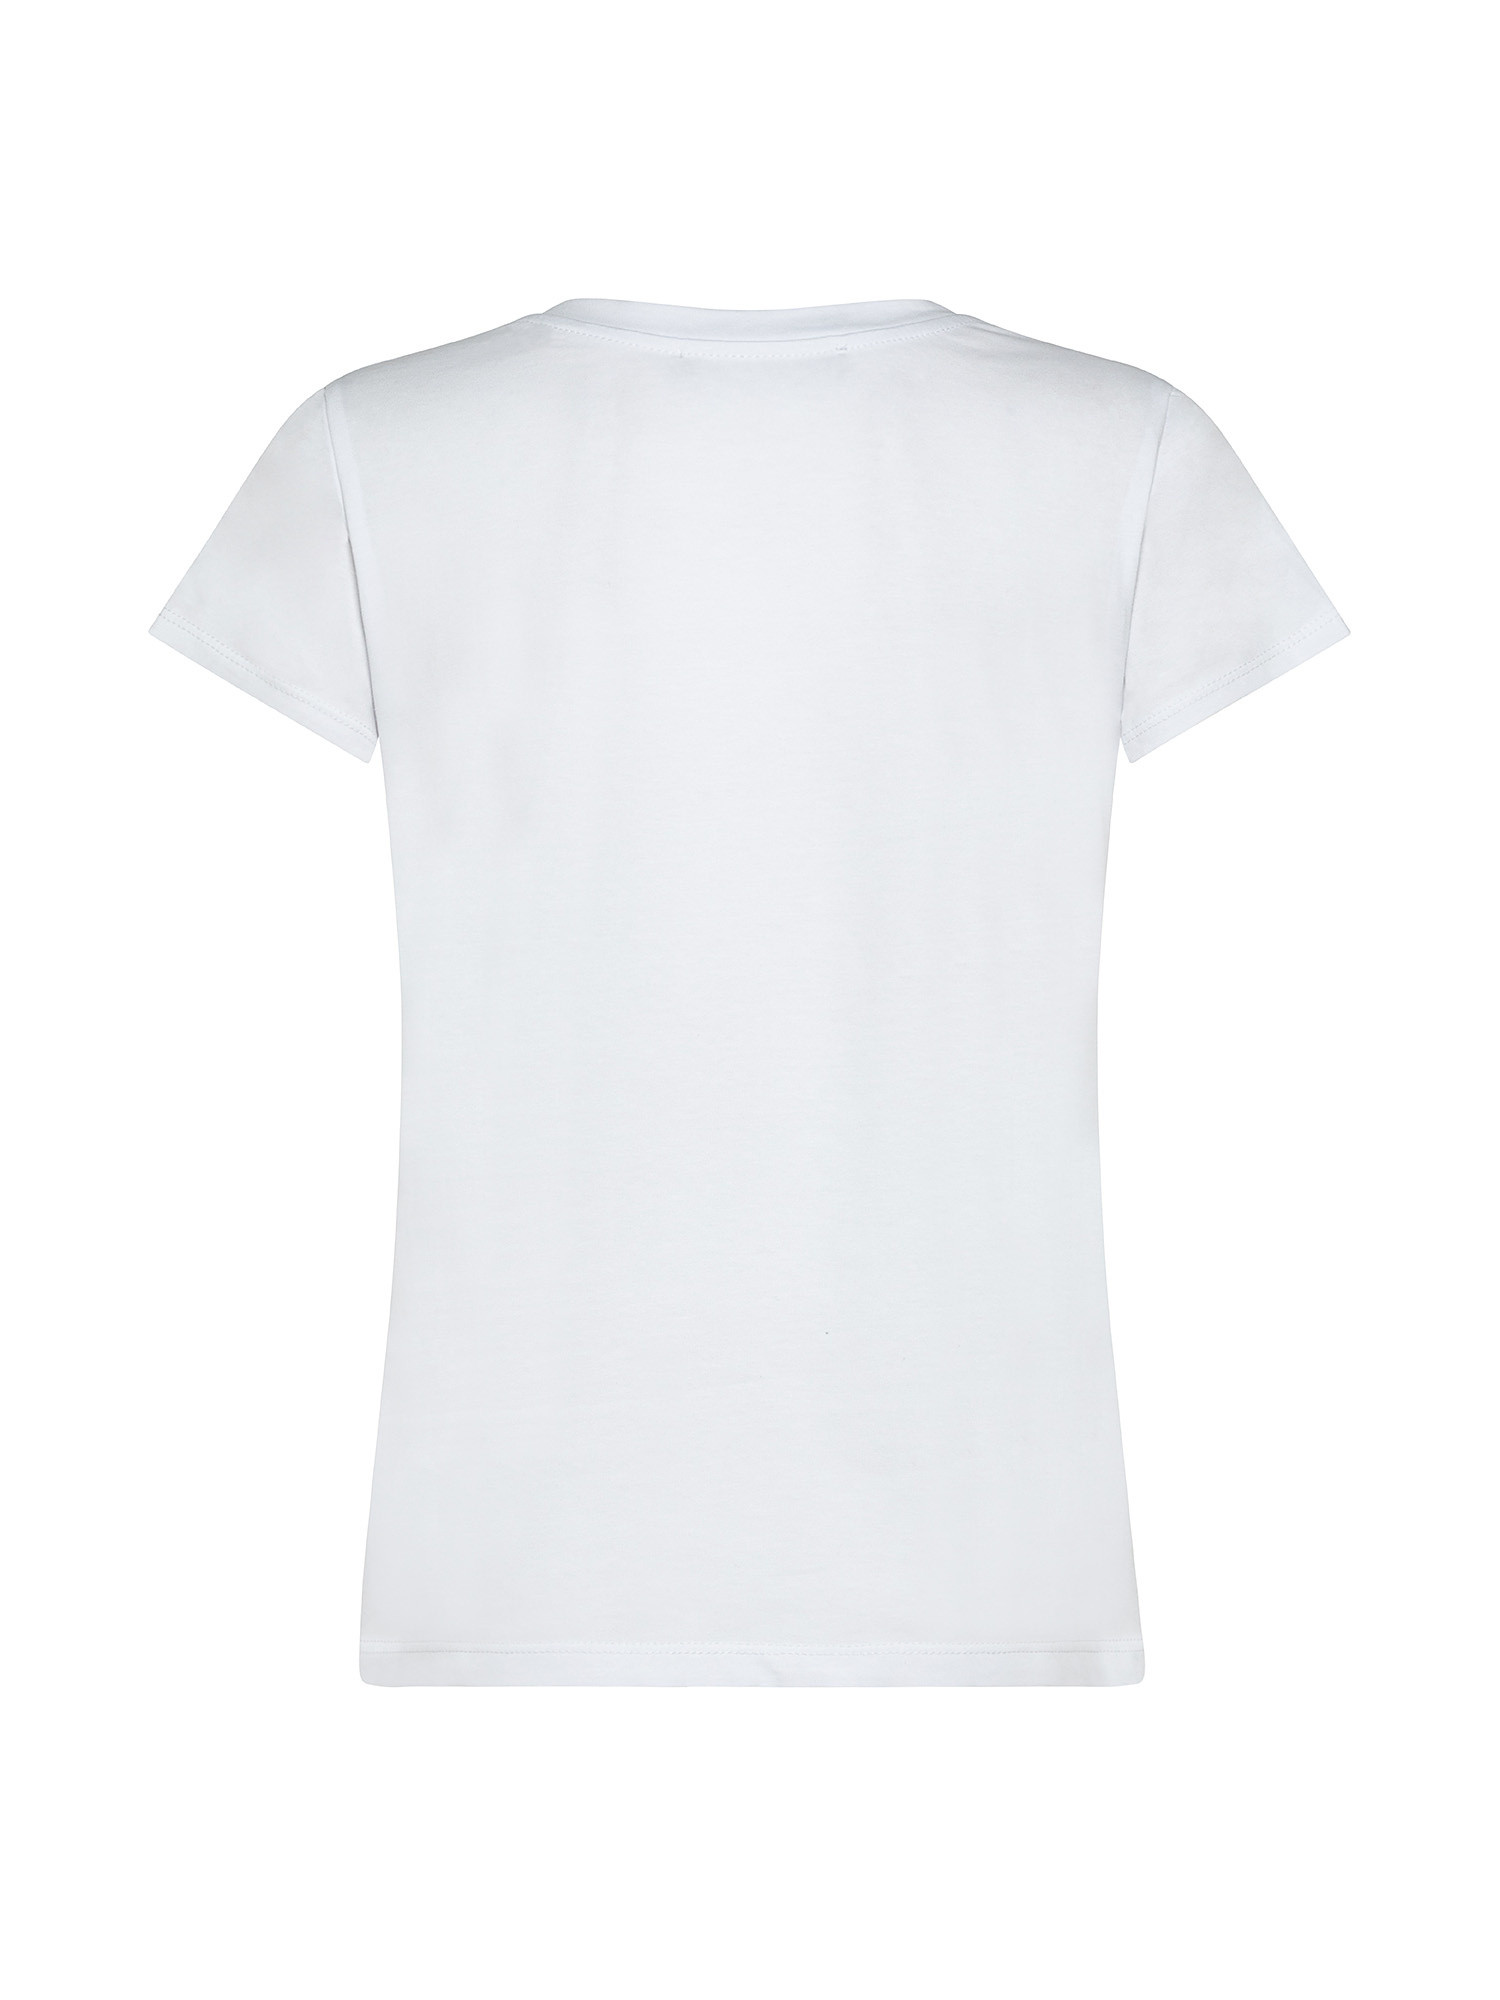 Round neck T-shirt with hearts, White, large image number 1